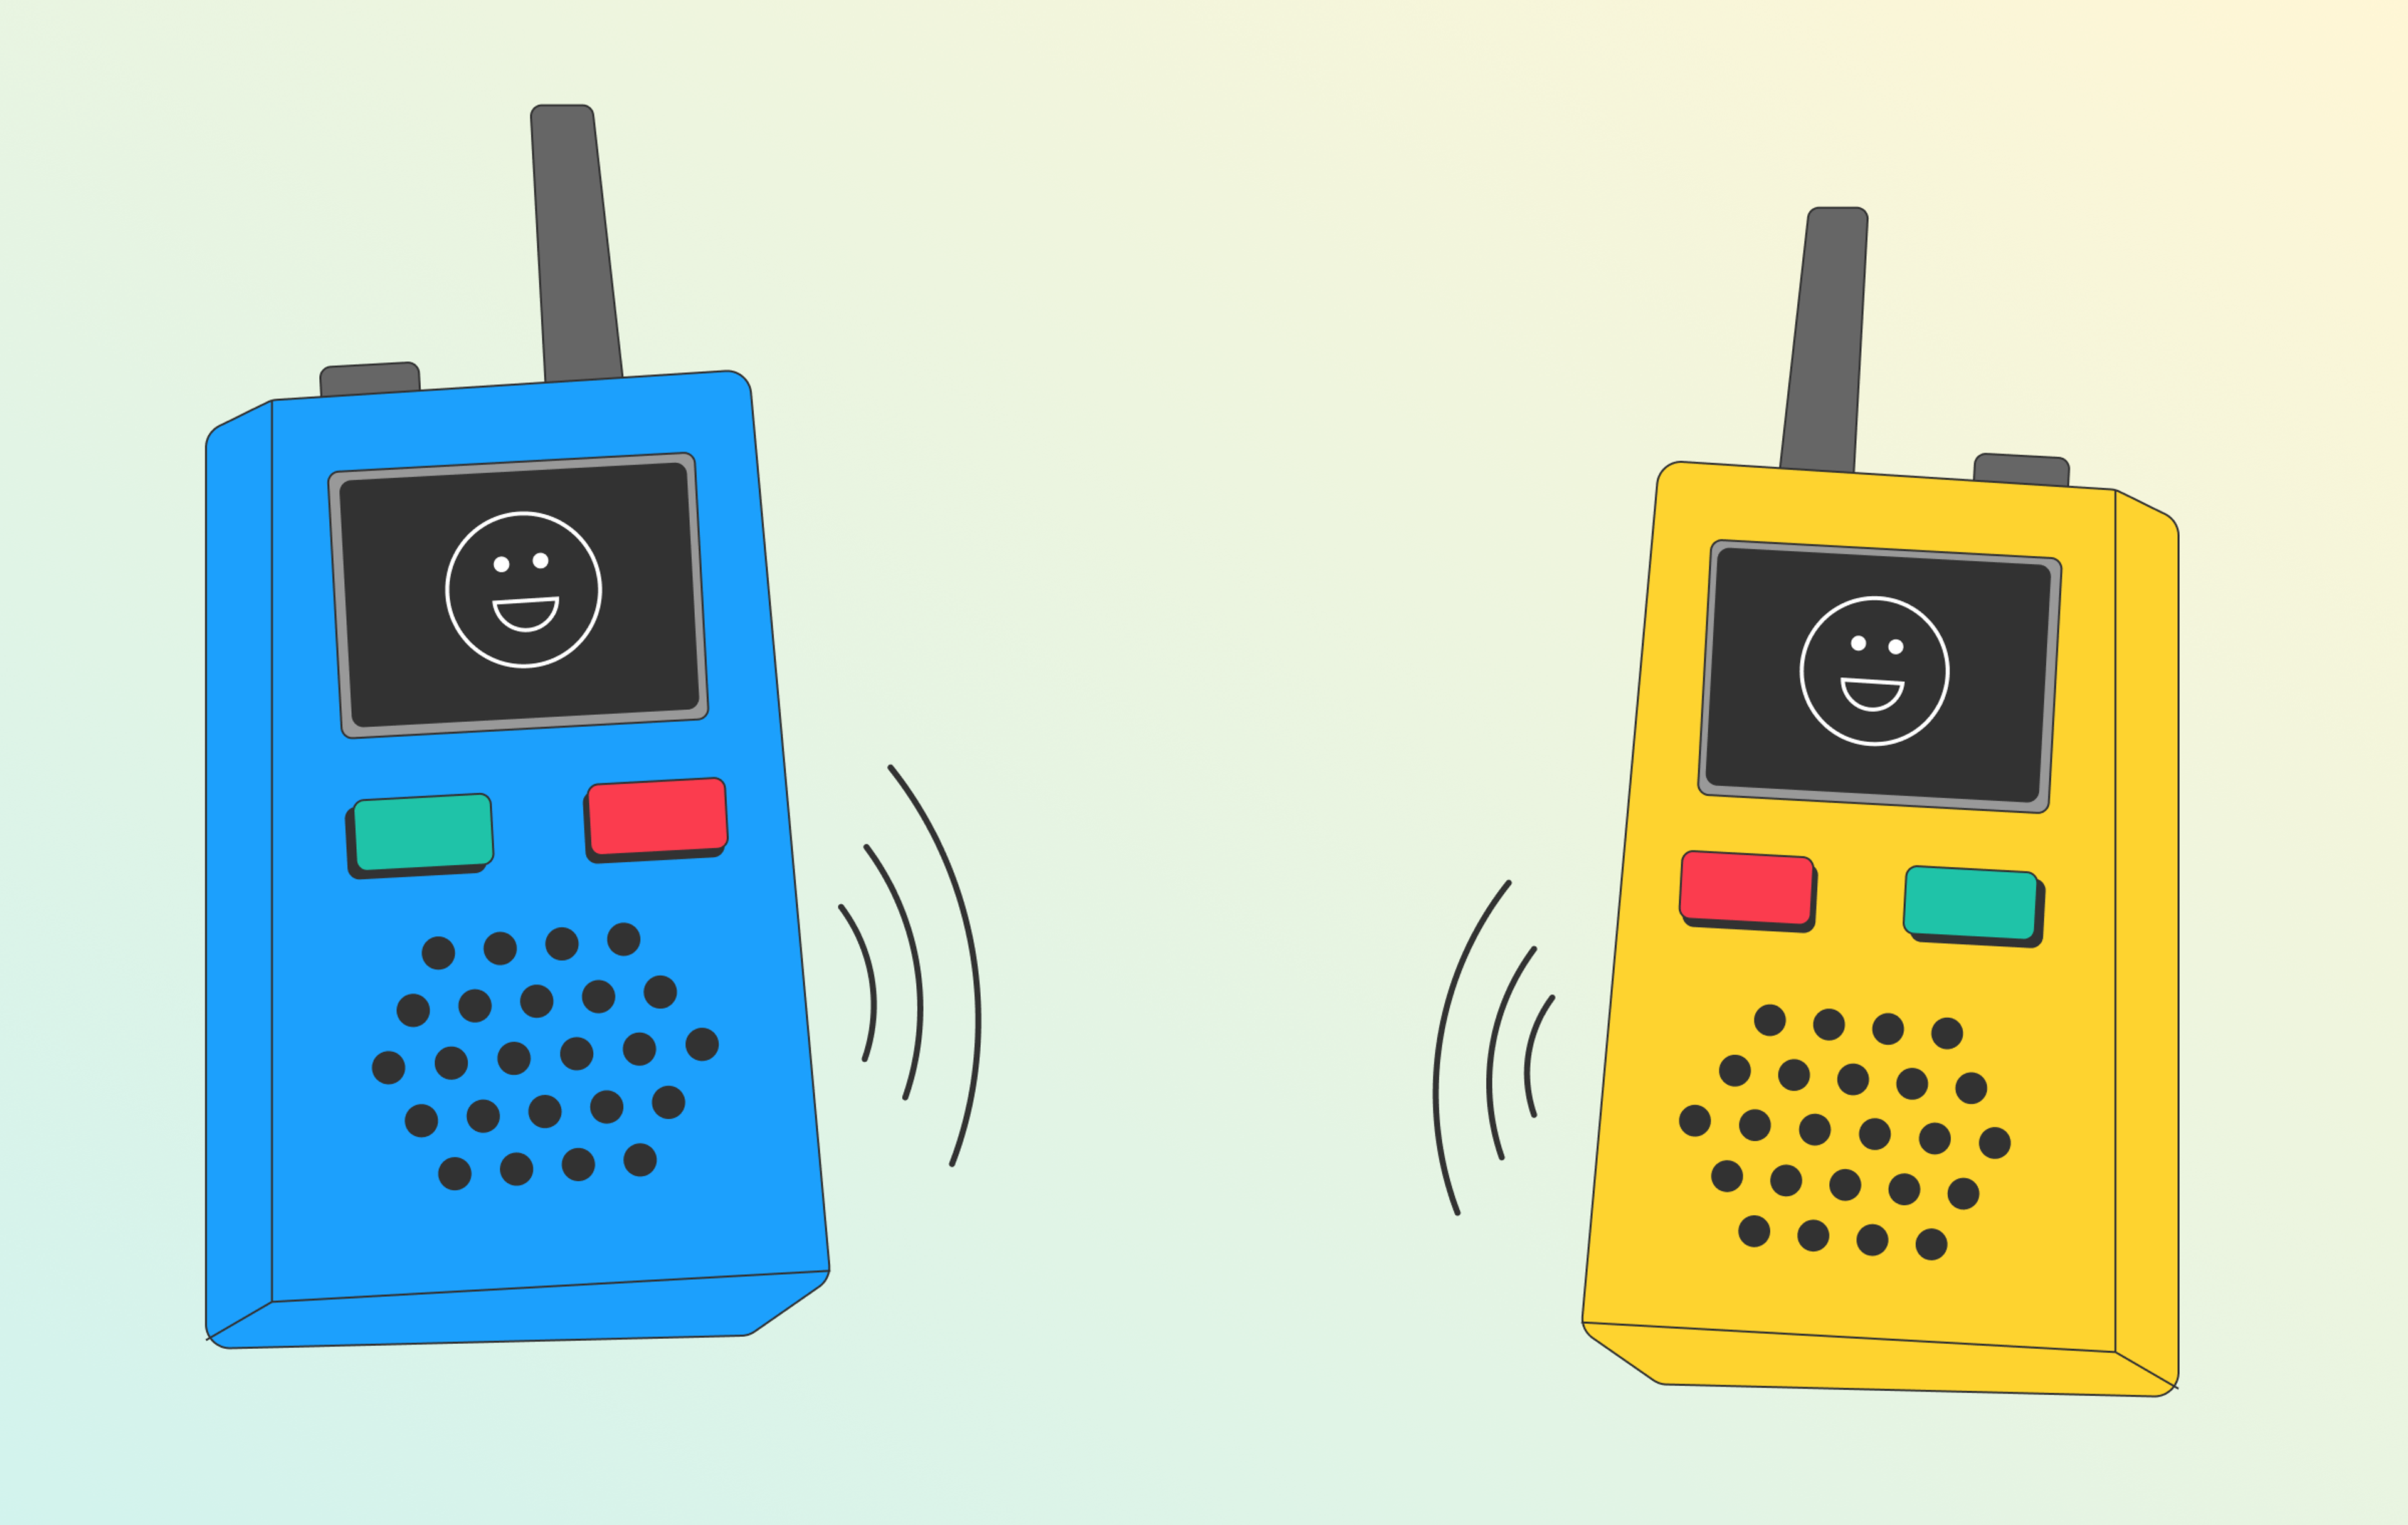 An illustration of two walkie-talkie handheld radios communicating with each other